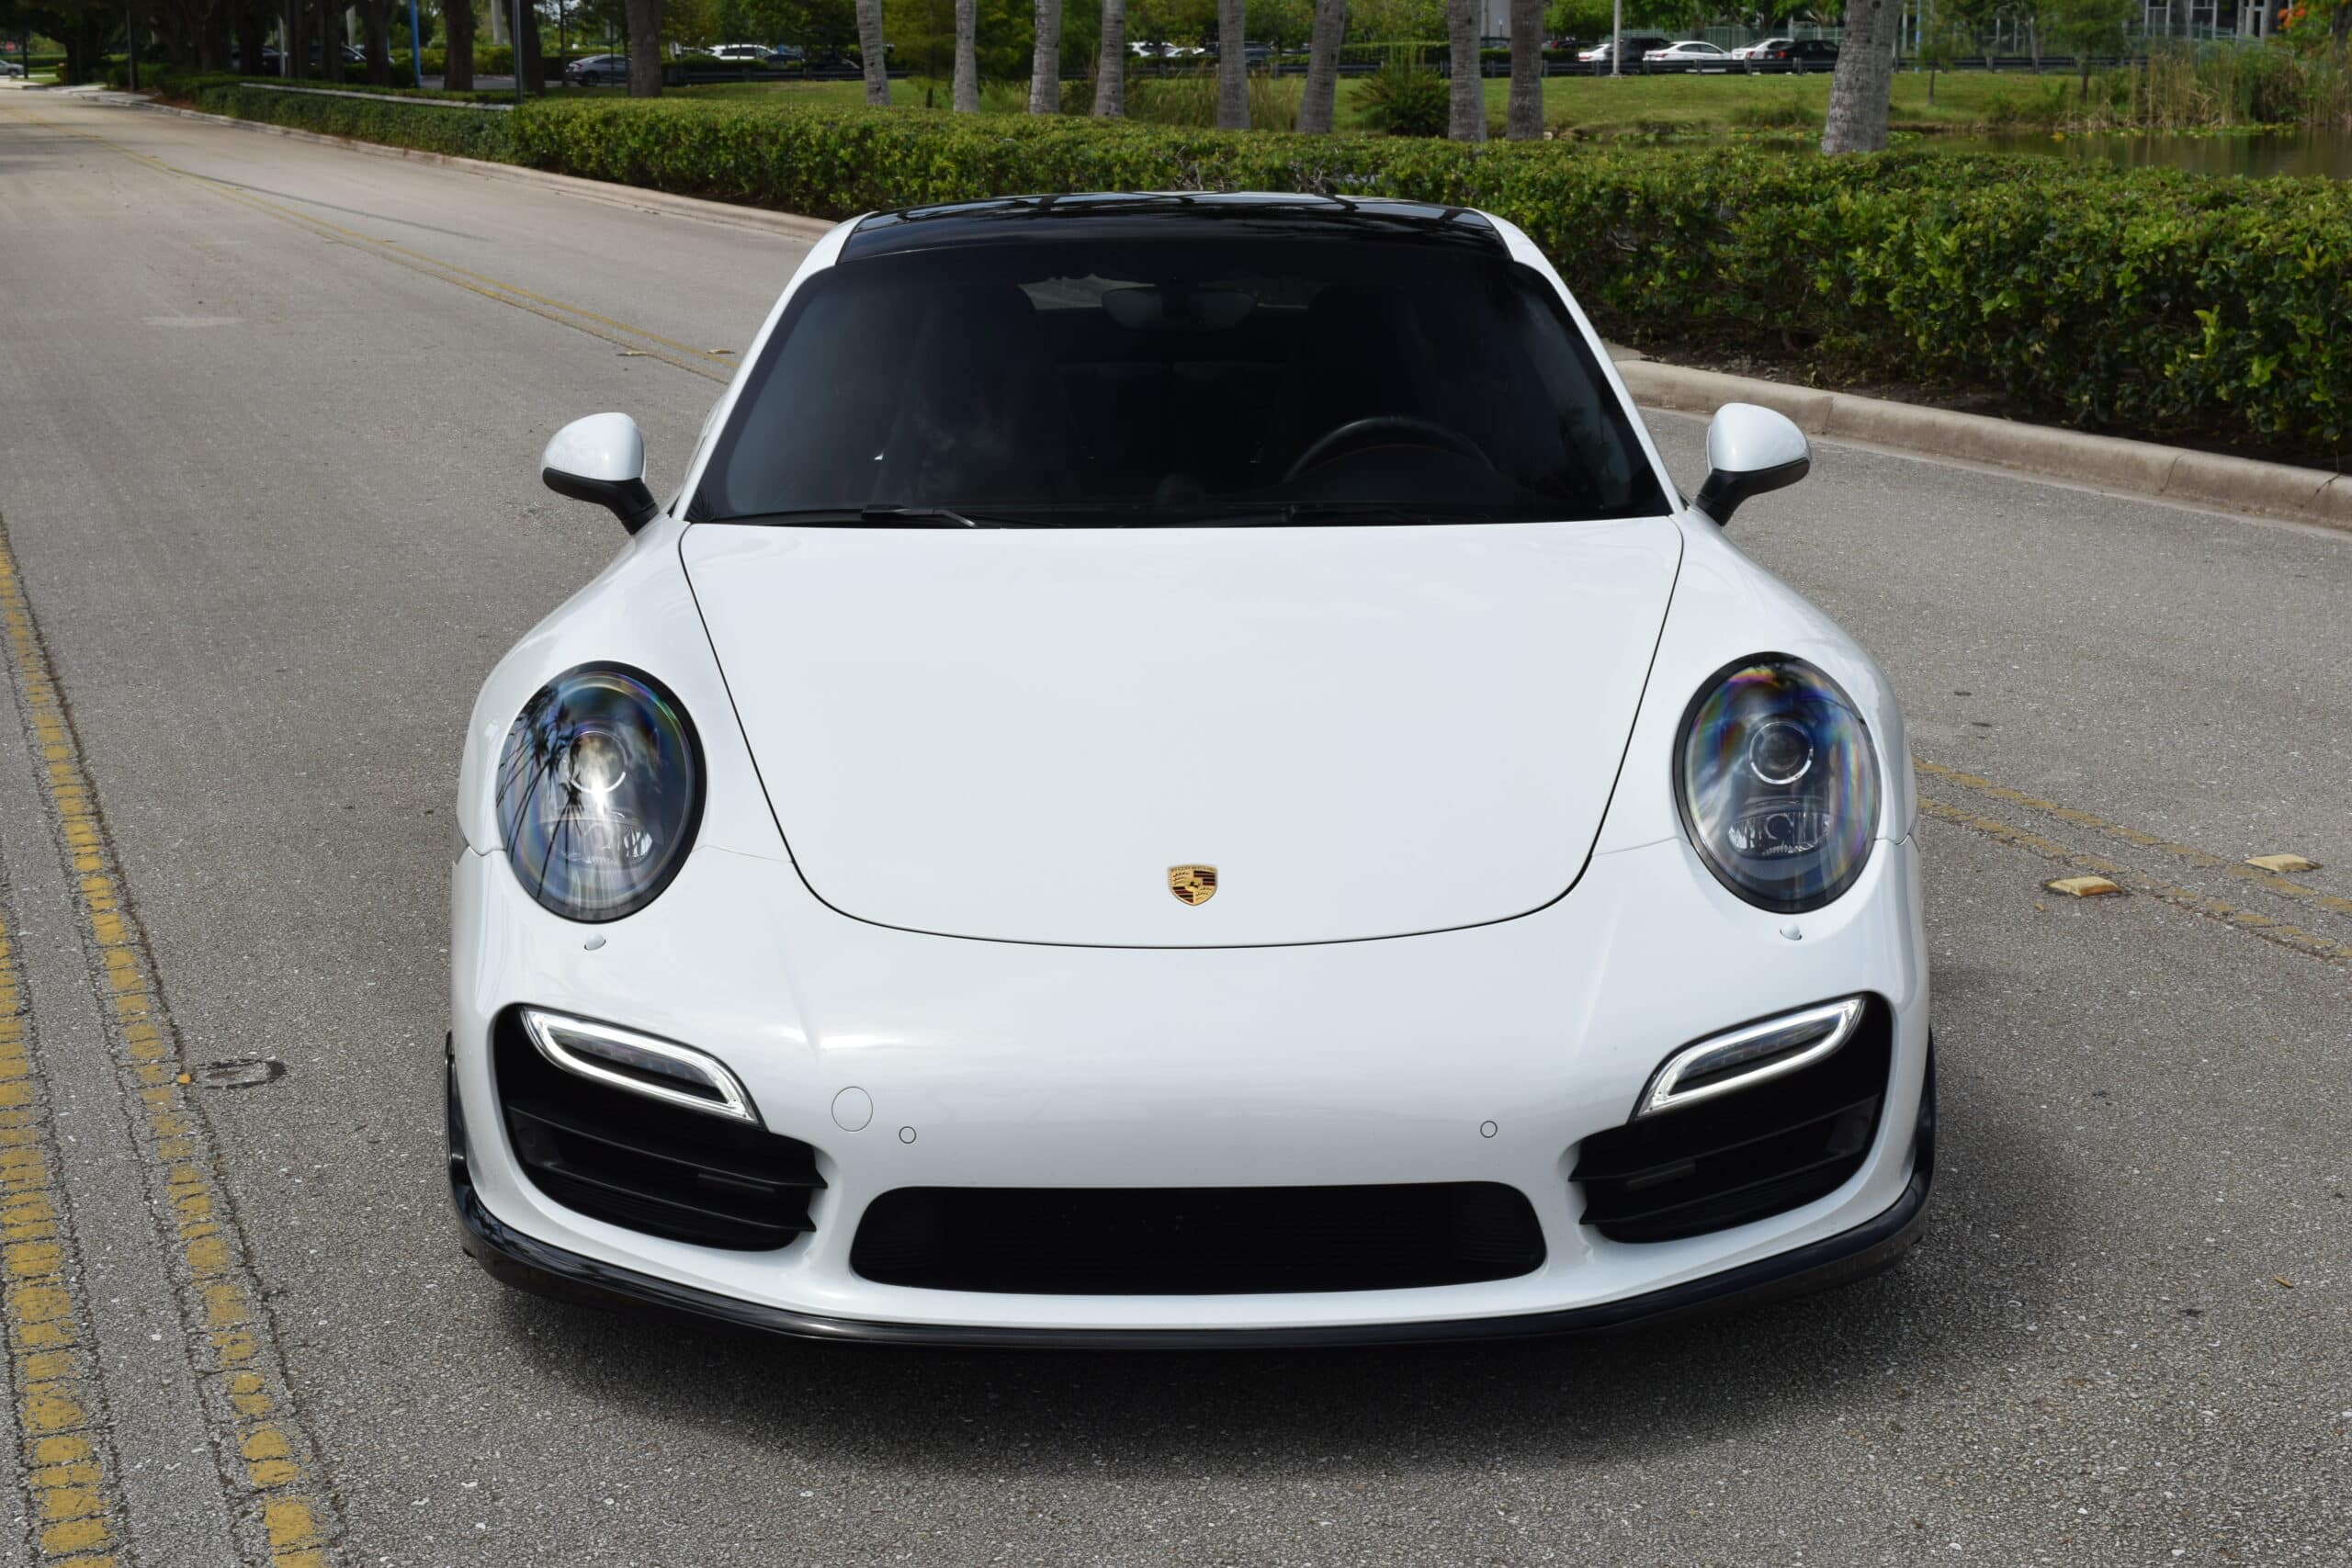 2015 991 Turbo, $ 171K MSRP BIG factory options list, Champion Porsche upgrades, Faster than a Turbo S